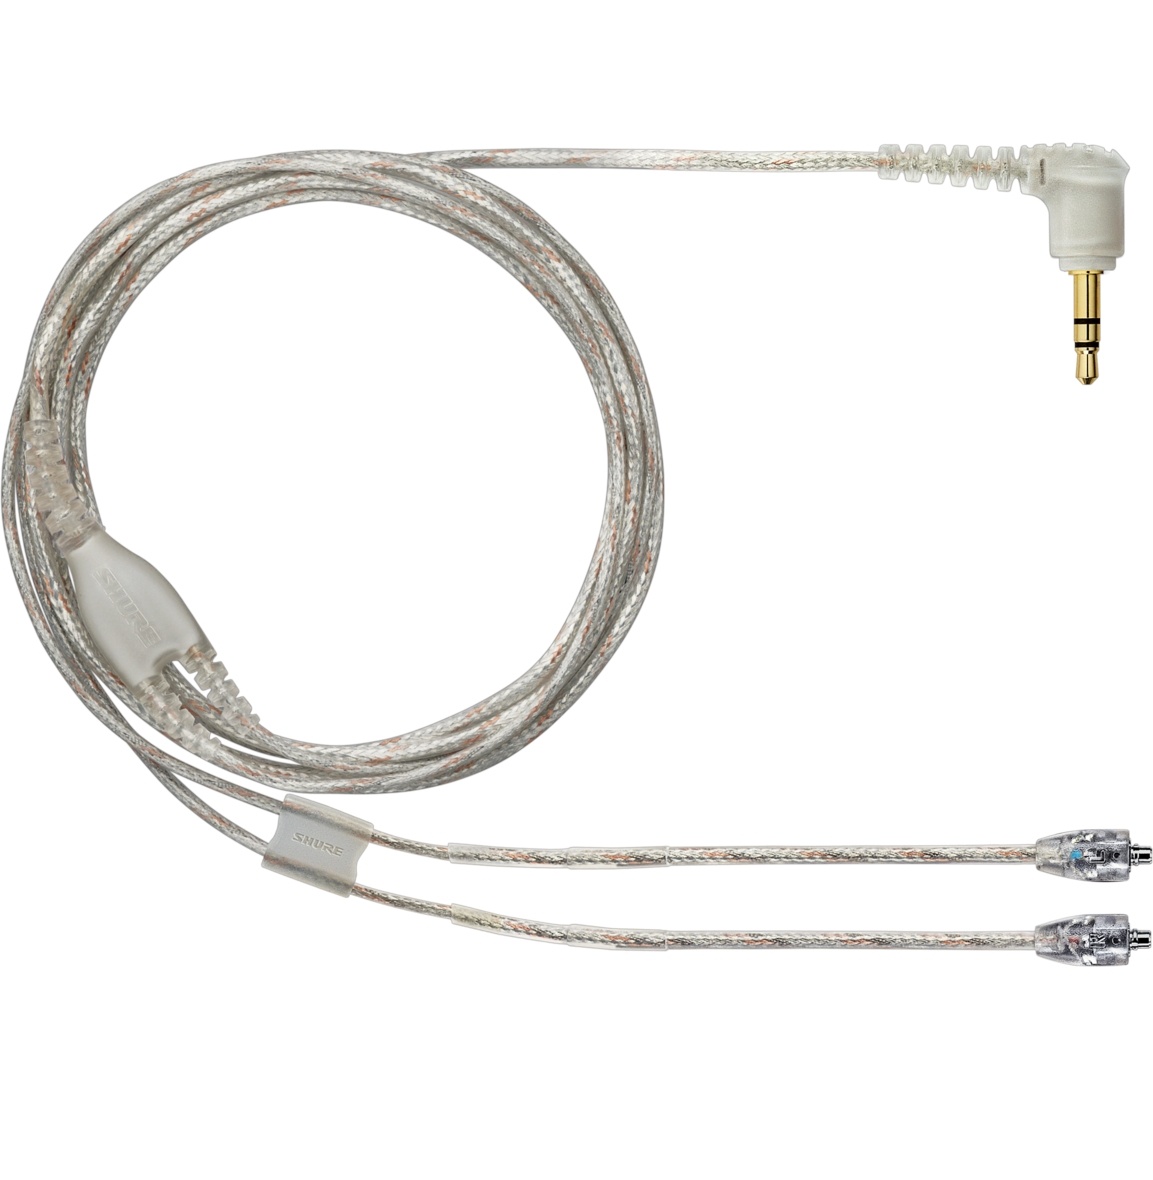 Shure EAC64CLS Earphone Replacement Cable with Nickel-Plated MMXC Connectors (Clear, 162 cm)